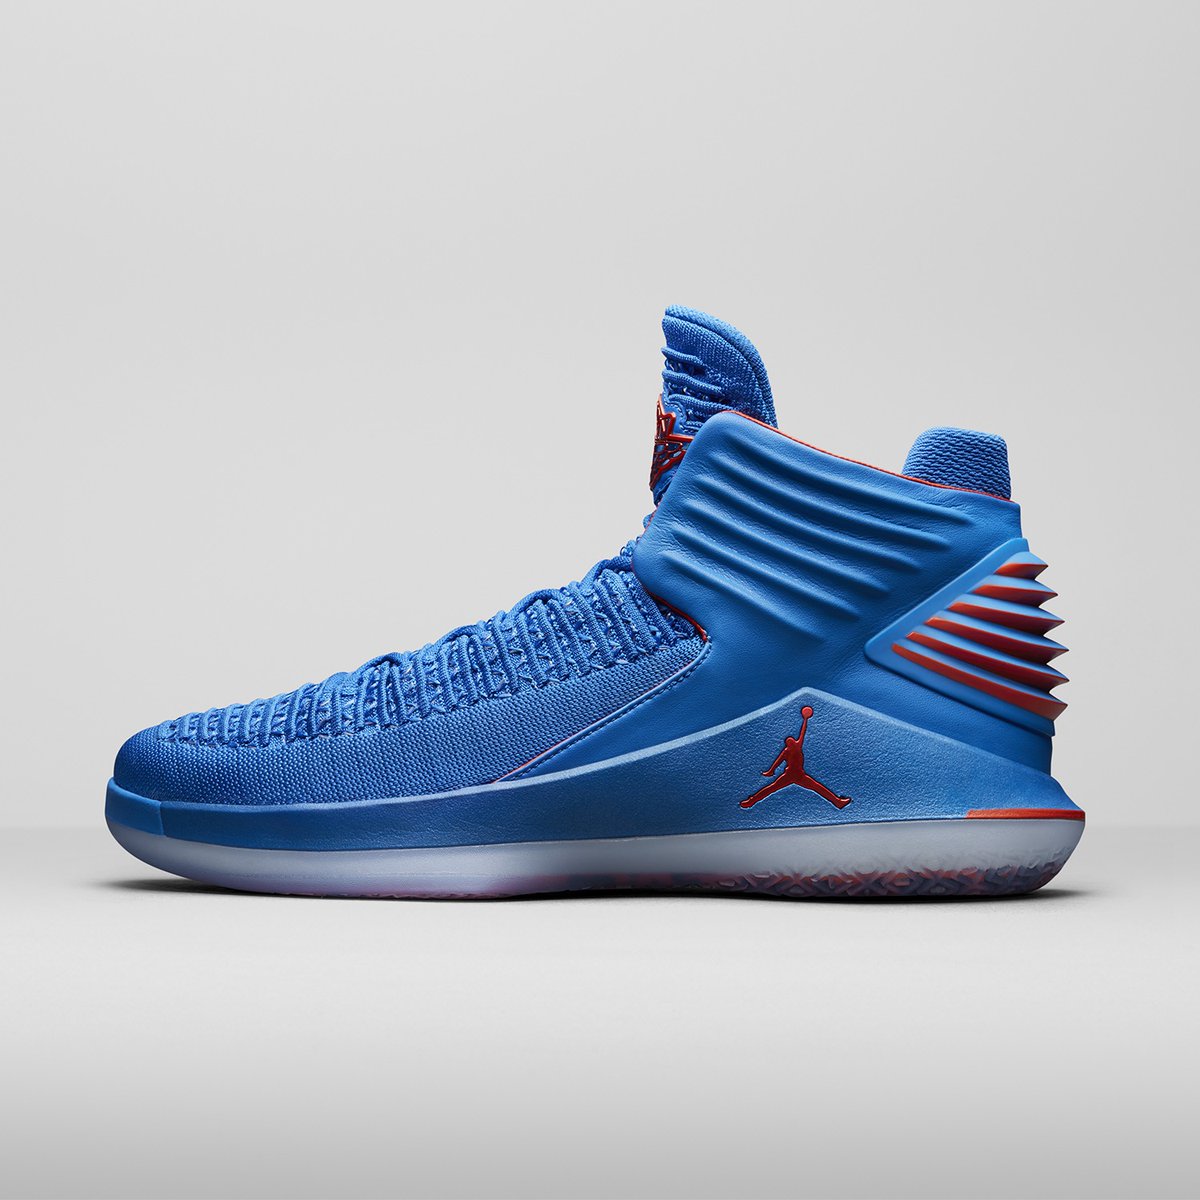 russell westbrook shoes new release